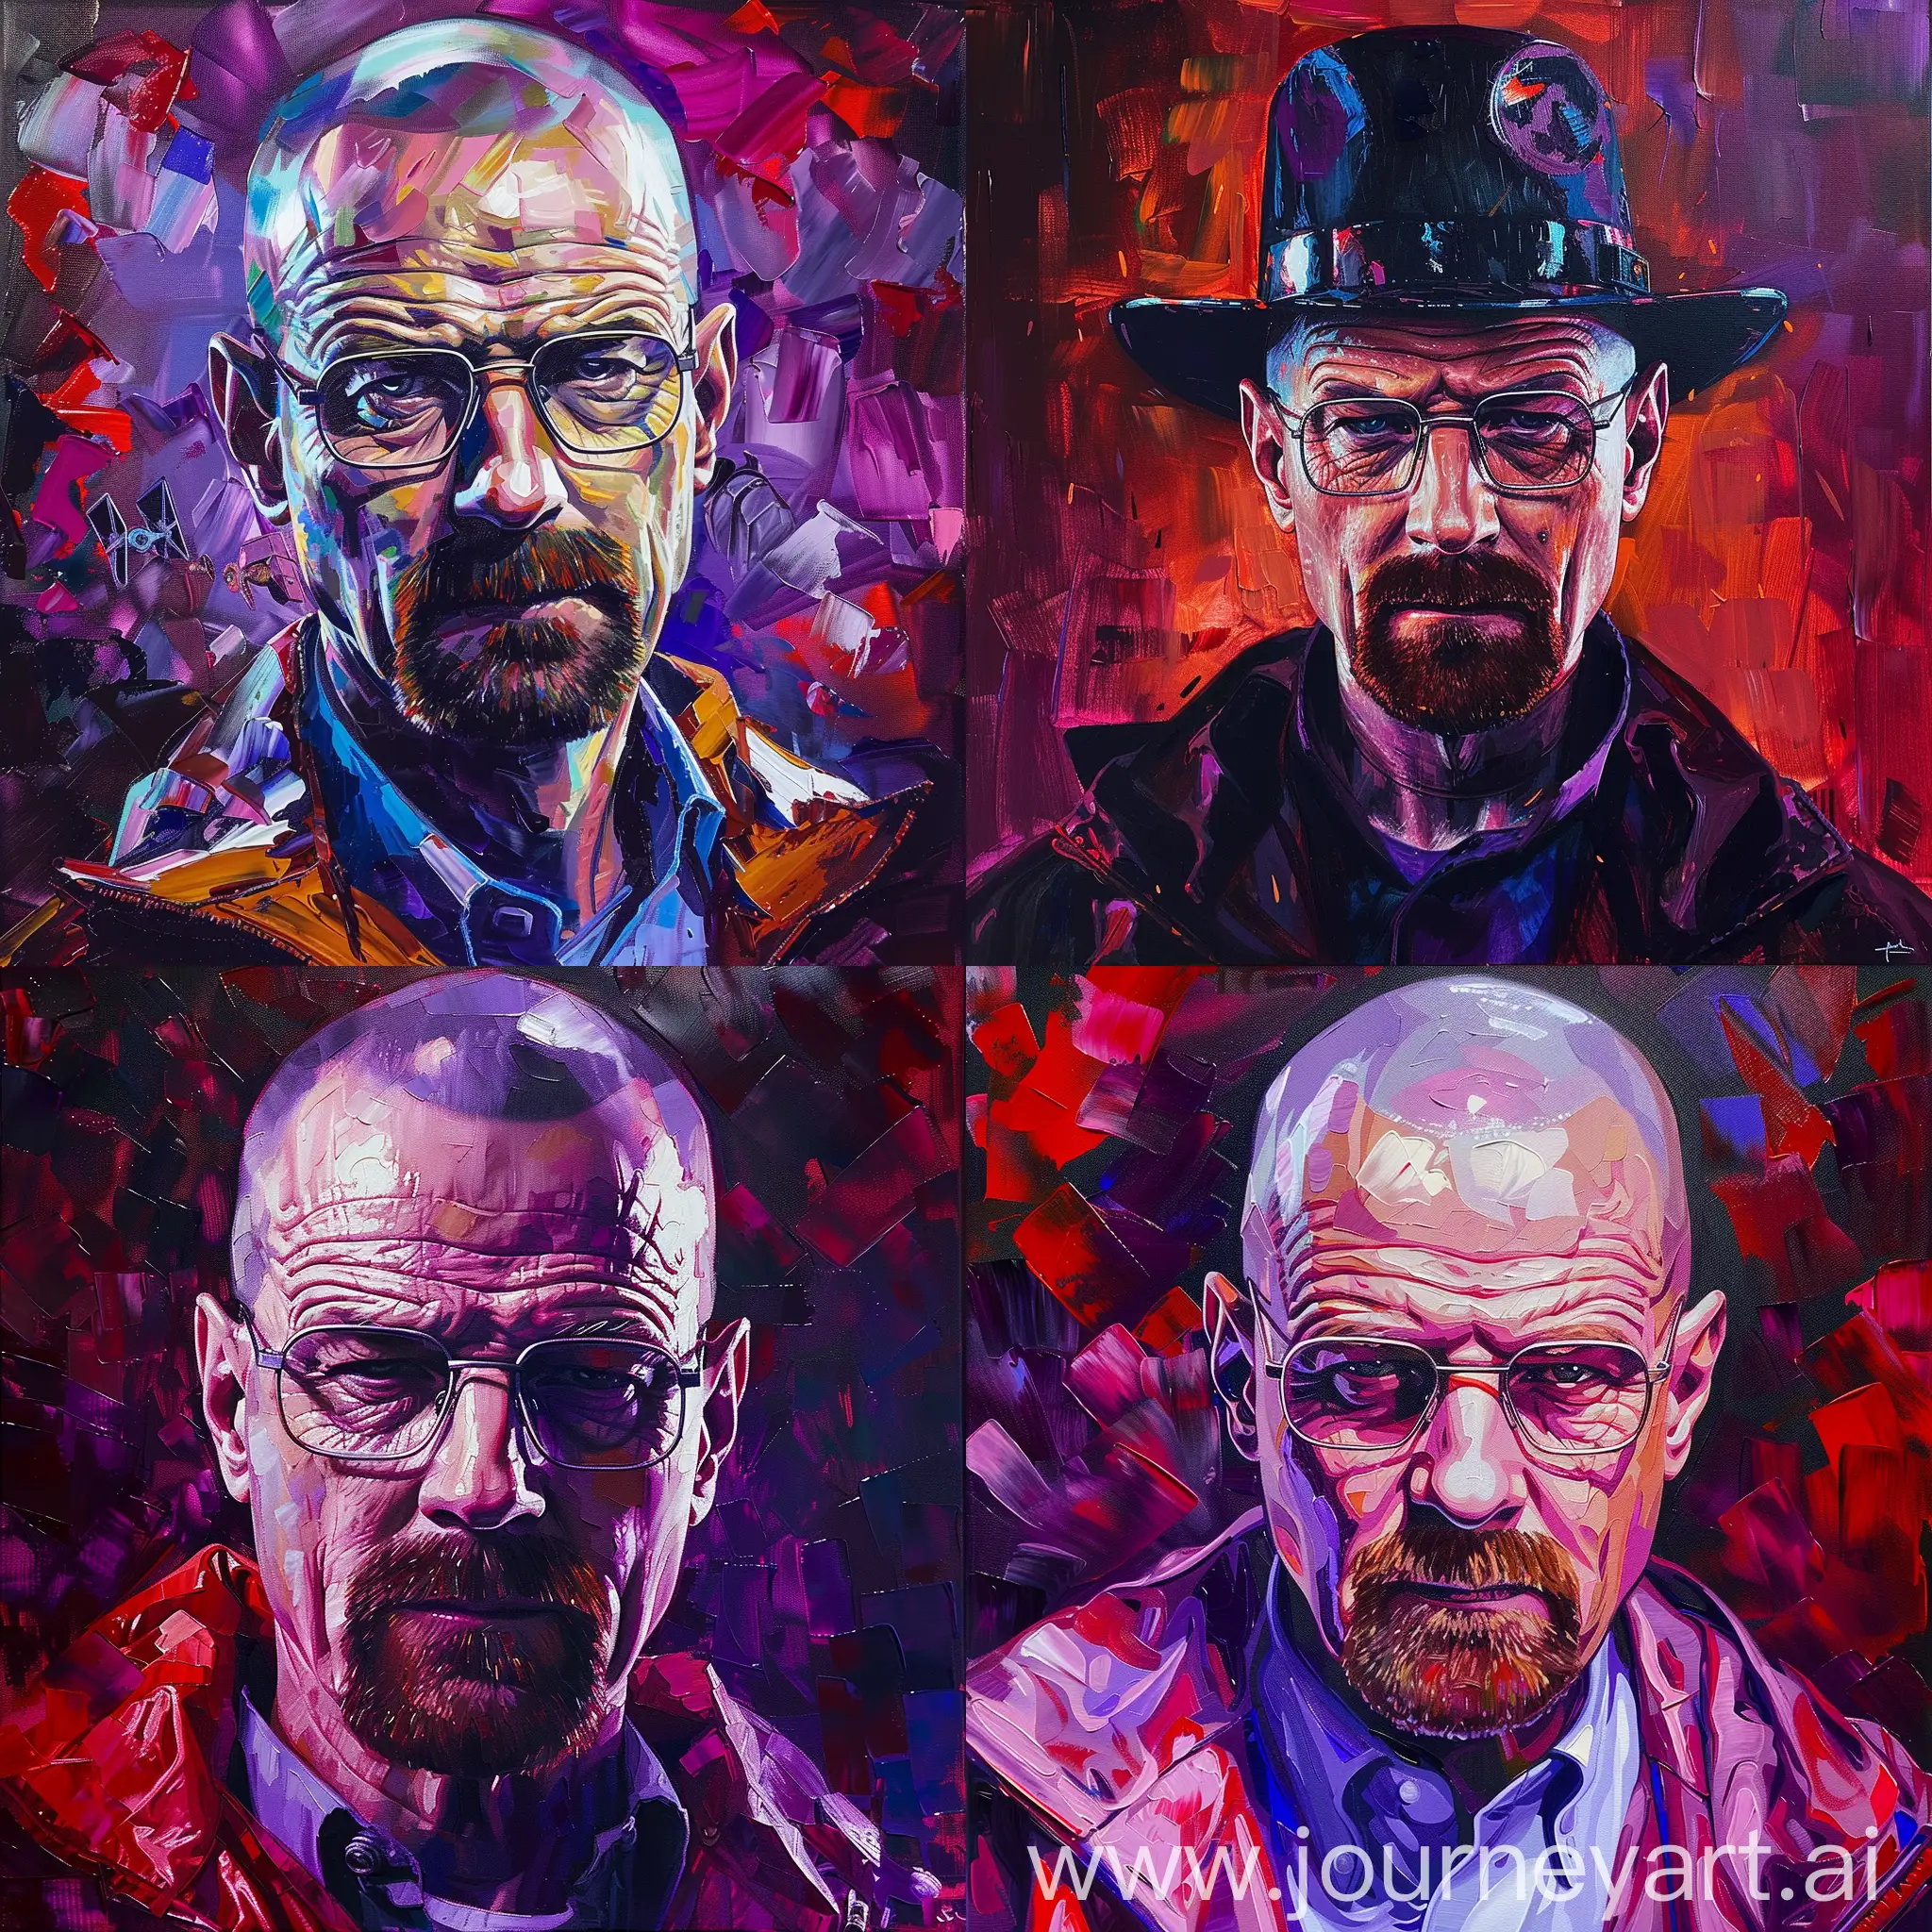 oil painting of heisenberg of breaking bad in star wars style with a color palette of bright moody purple and red. There are also touches of bright skin tone in high details --c 3